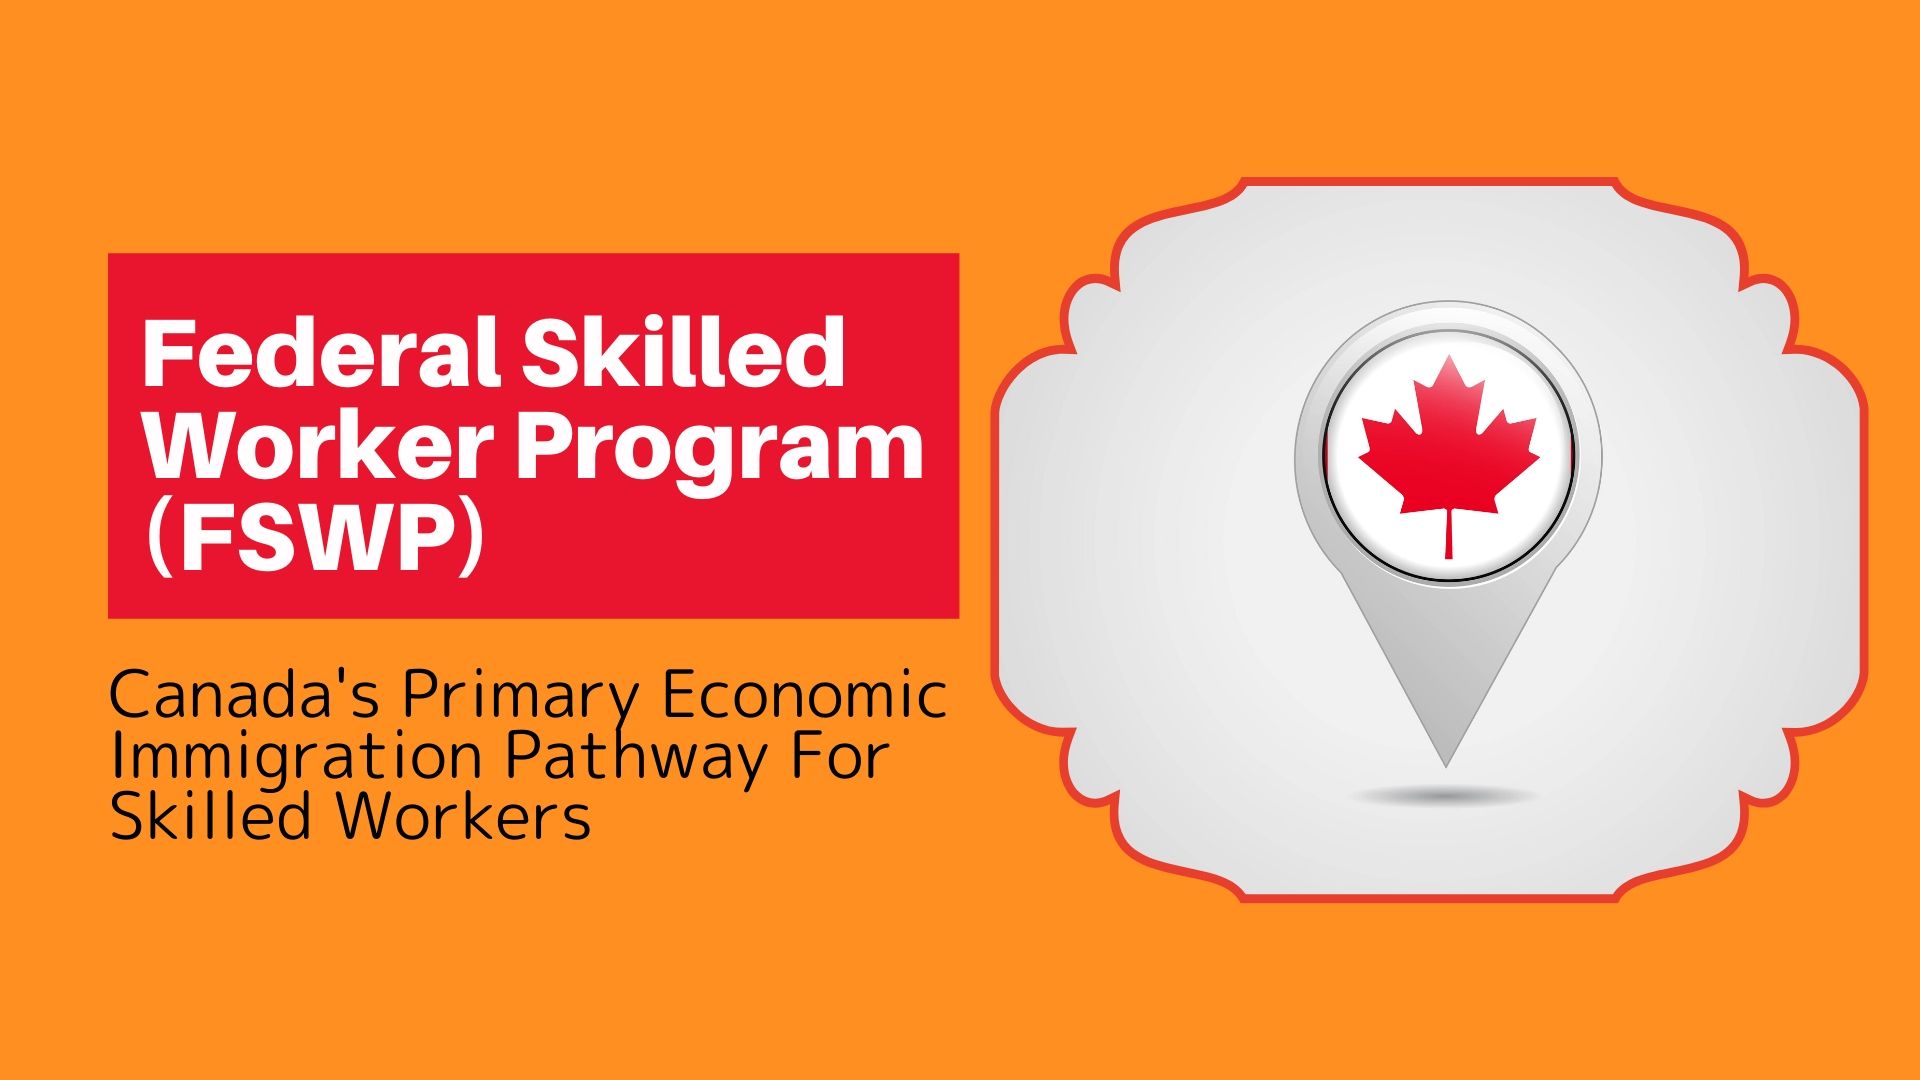 Federal Skilled Worker Program (FSWP) - Canada's Primary Economic Immigration Pathway For Skilled Workers